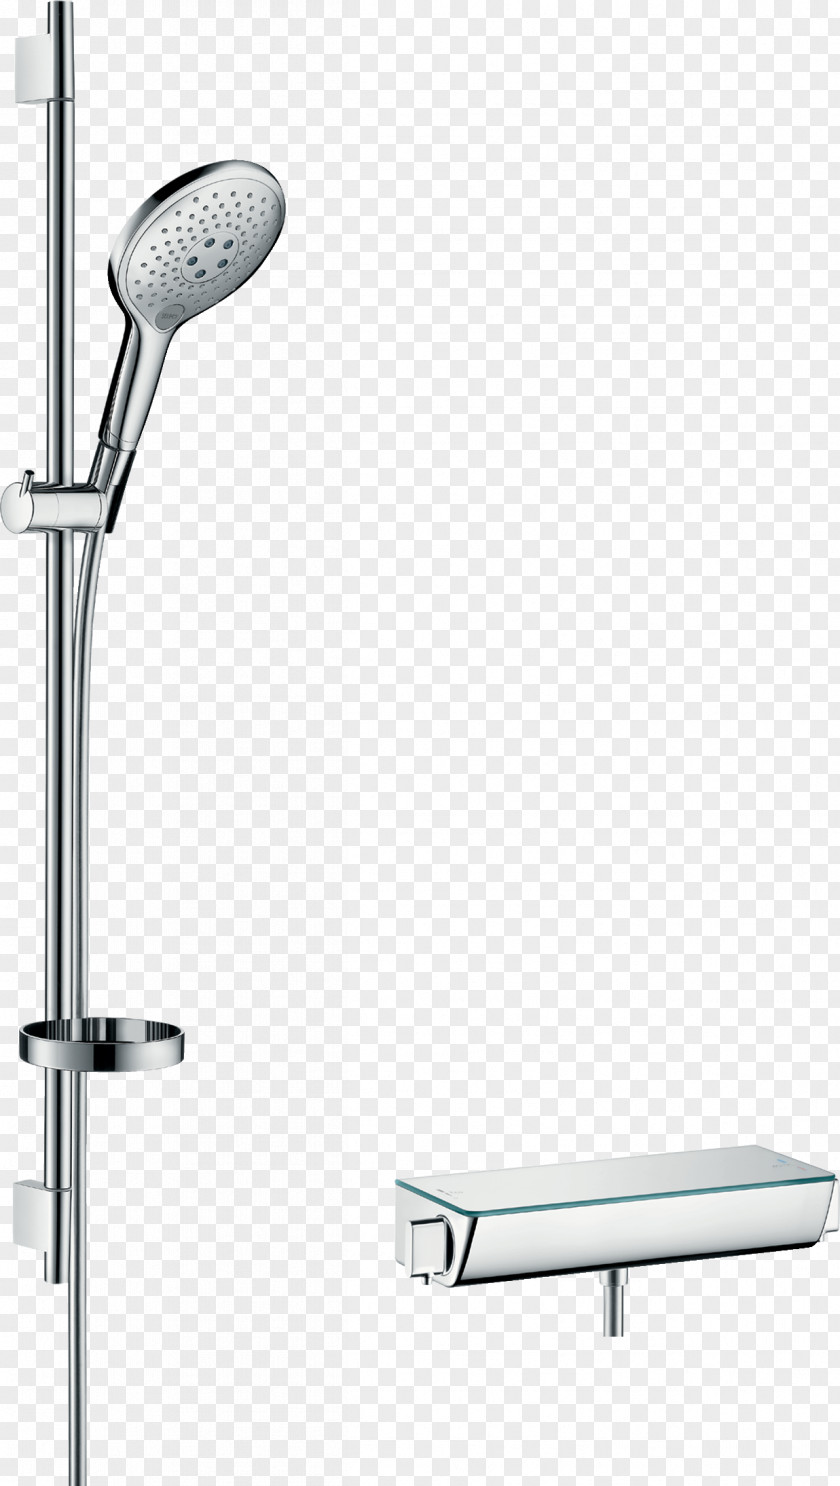 Shower Hansgrohe Thermostatic Mixing Valve Raindance Select S 150 Bathroom PNG